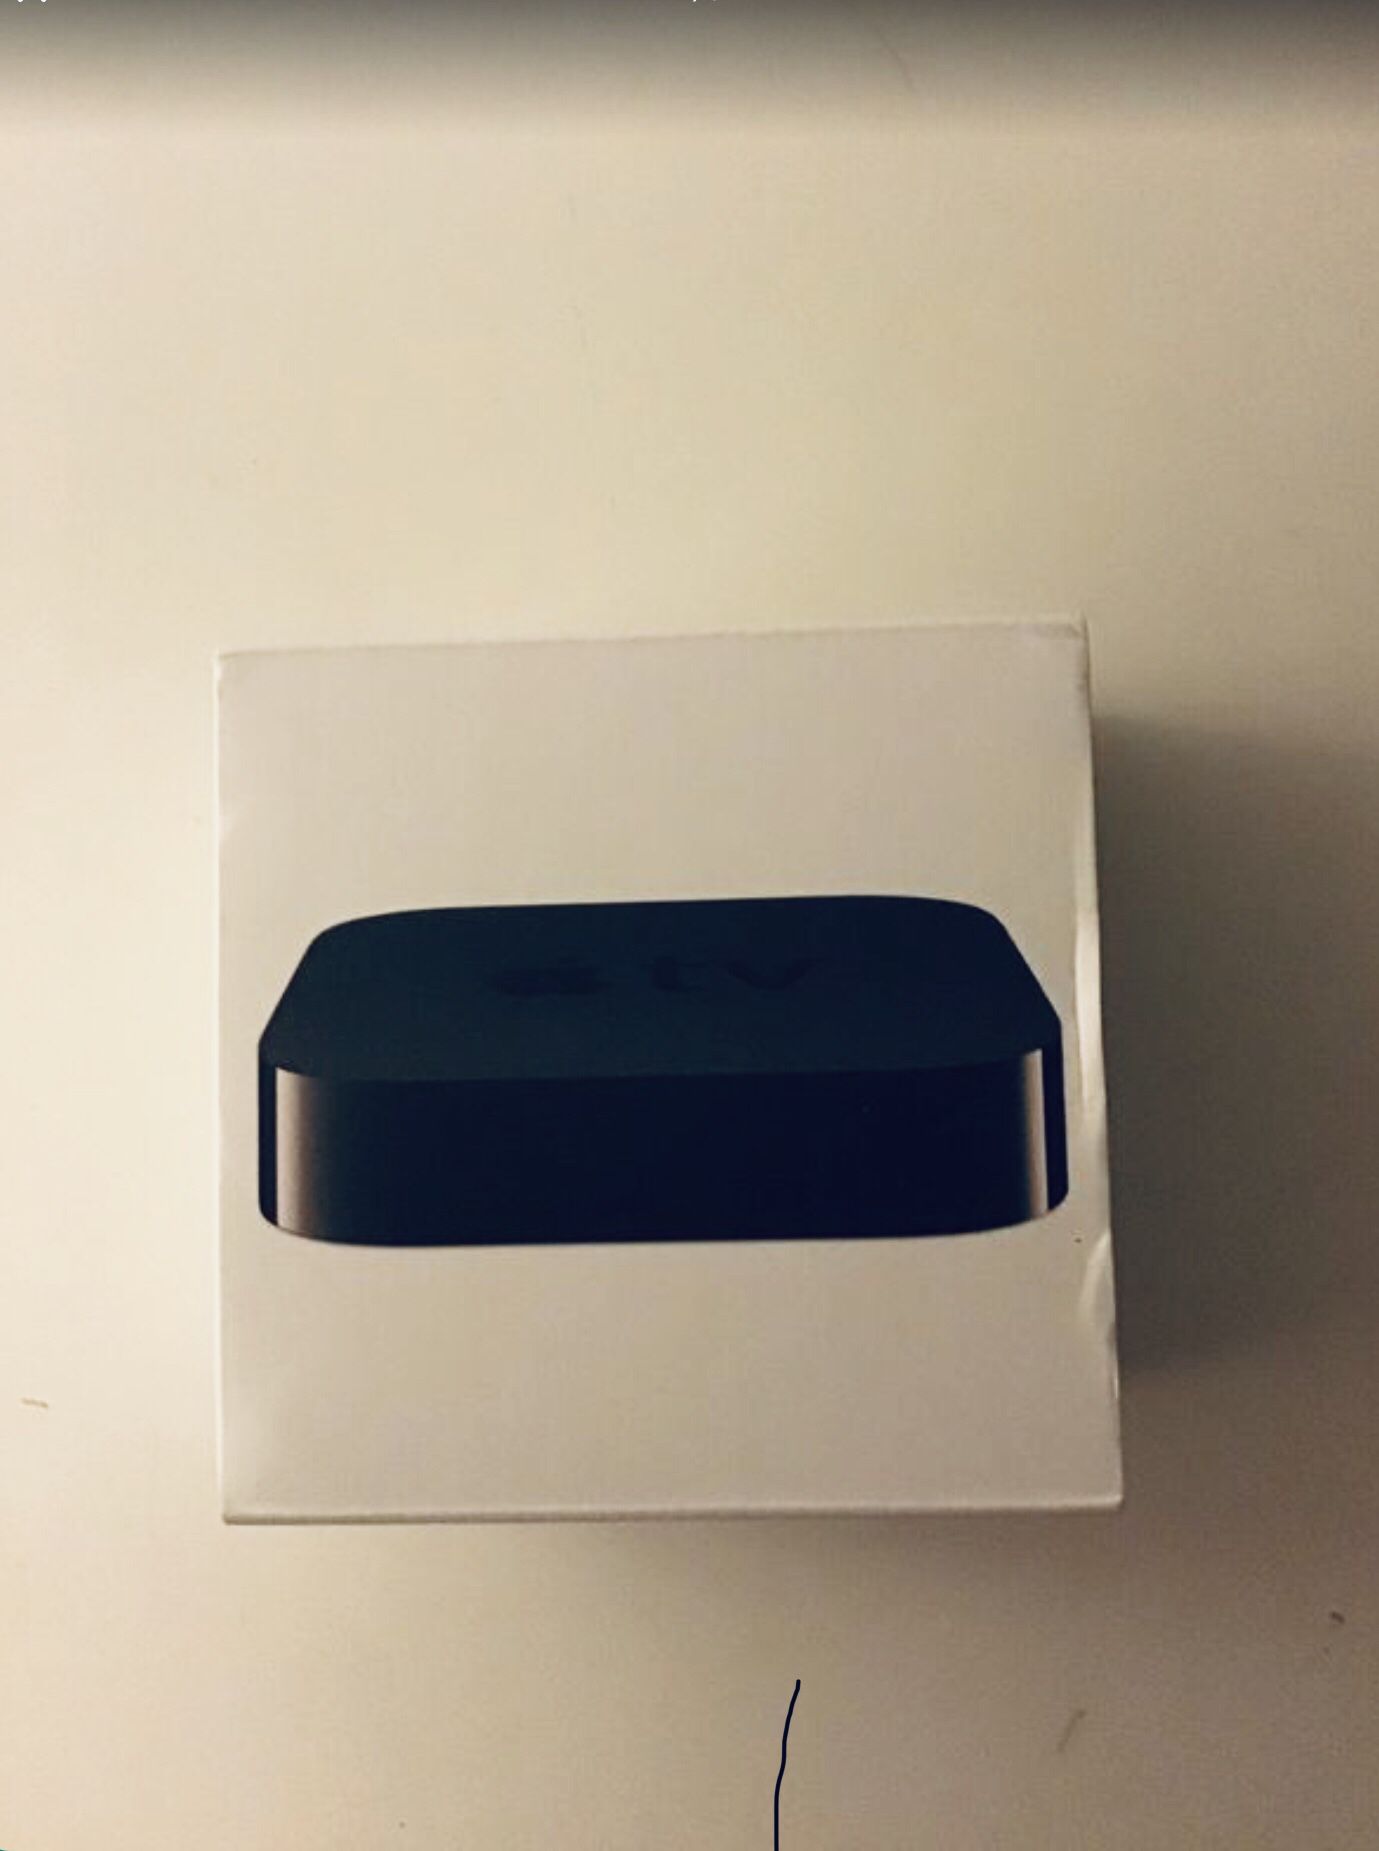 Apple TV with box and remote